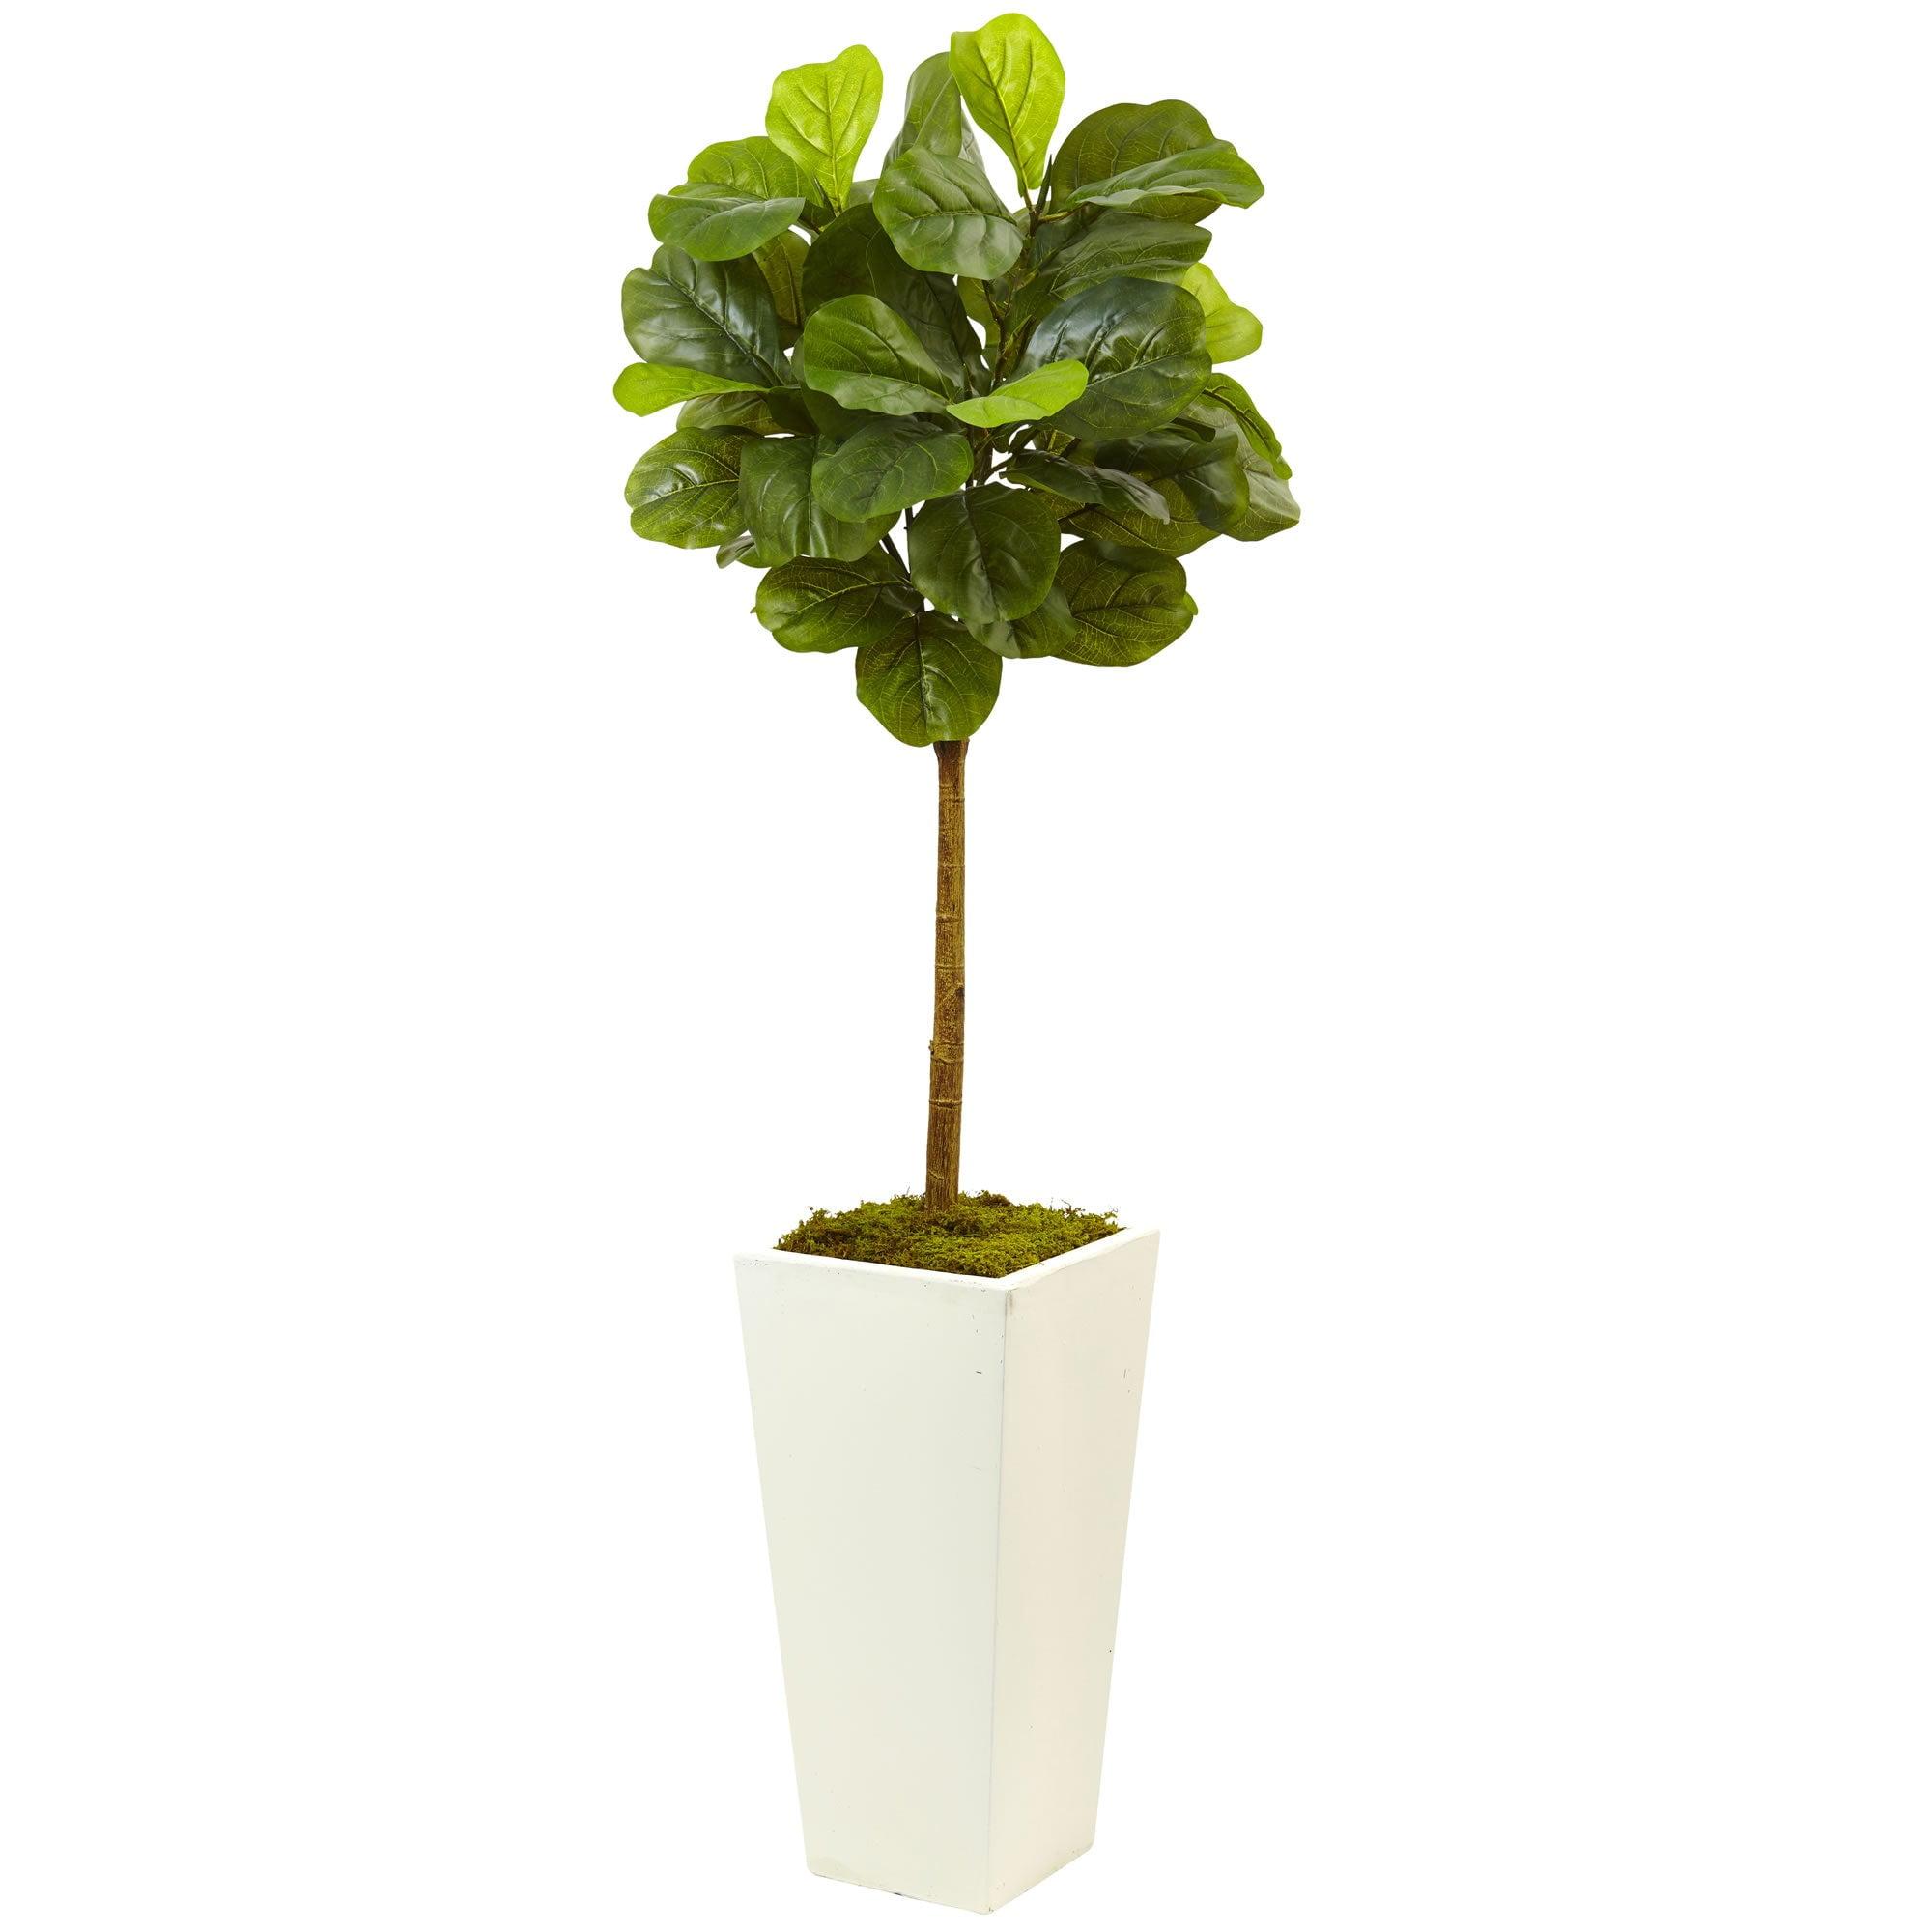 Luxe 5' Fiddle Leaf Fig in White Planter with Integrated Lighting